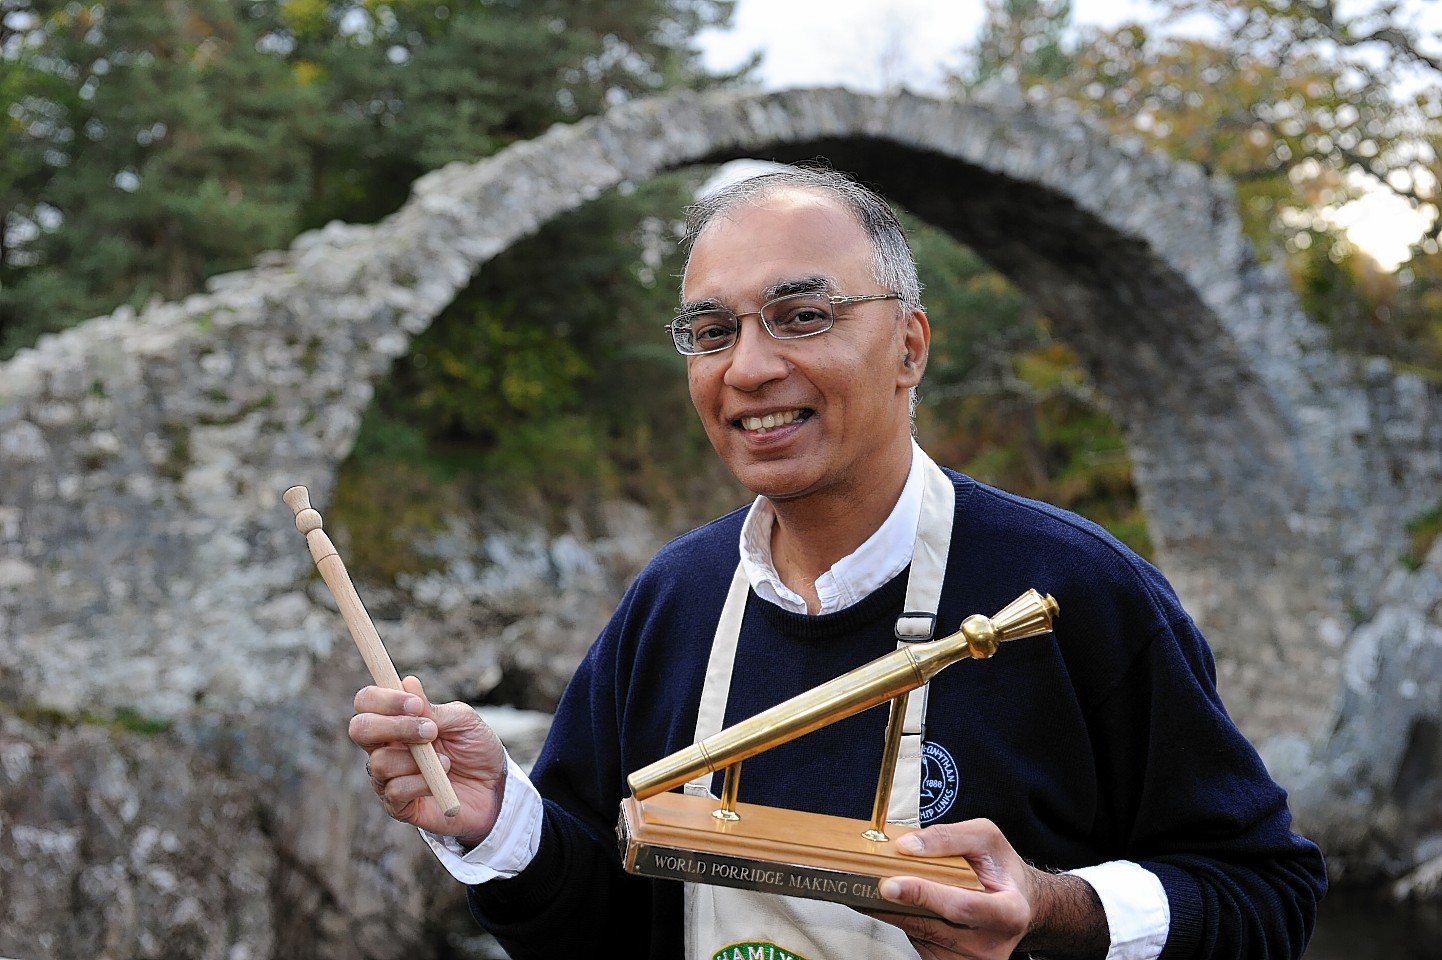 Izhar Khan with the golden spurtle last year